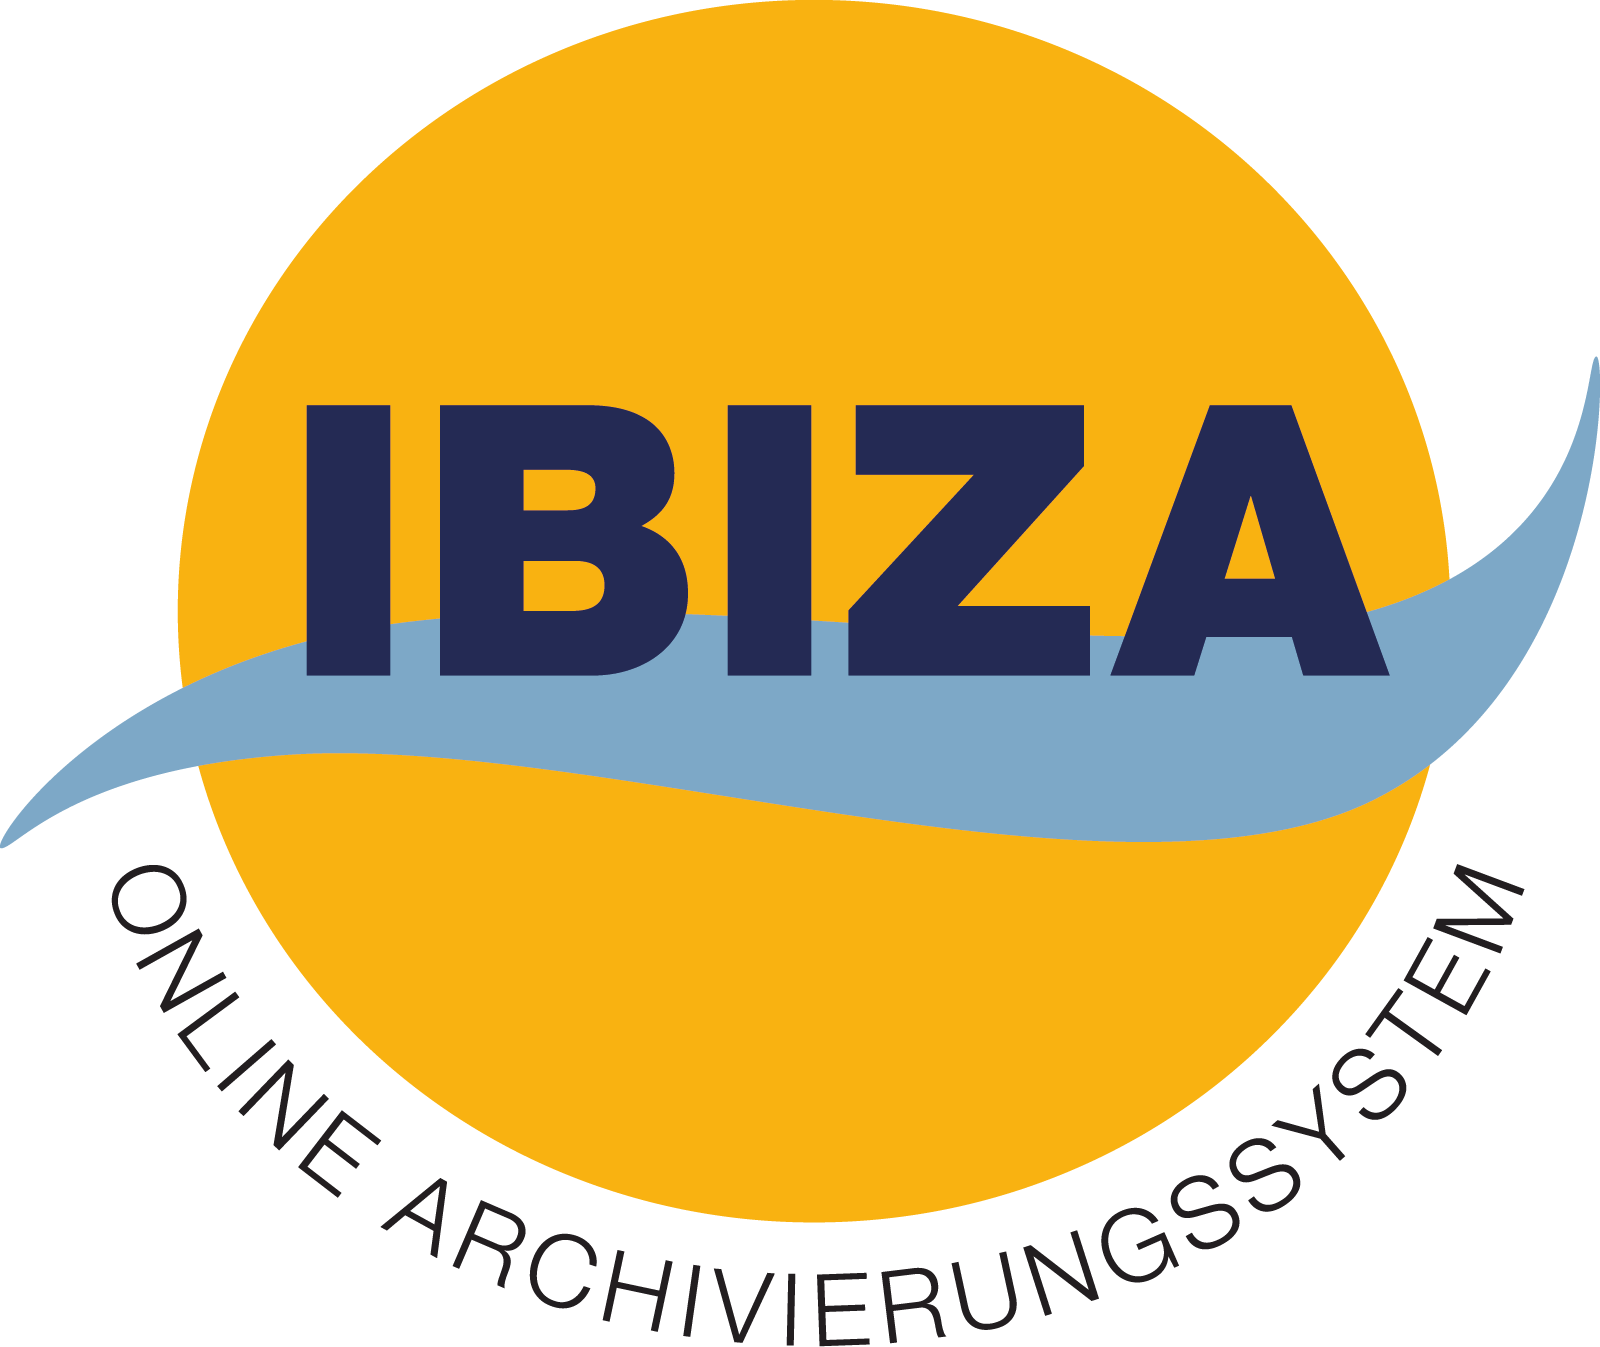 There are many good reasons for using the IBIZA Online archiving system: